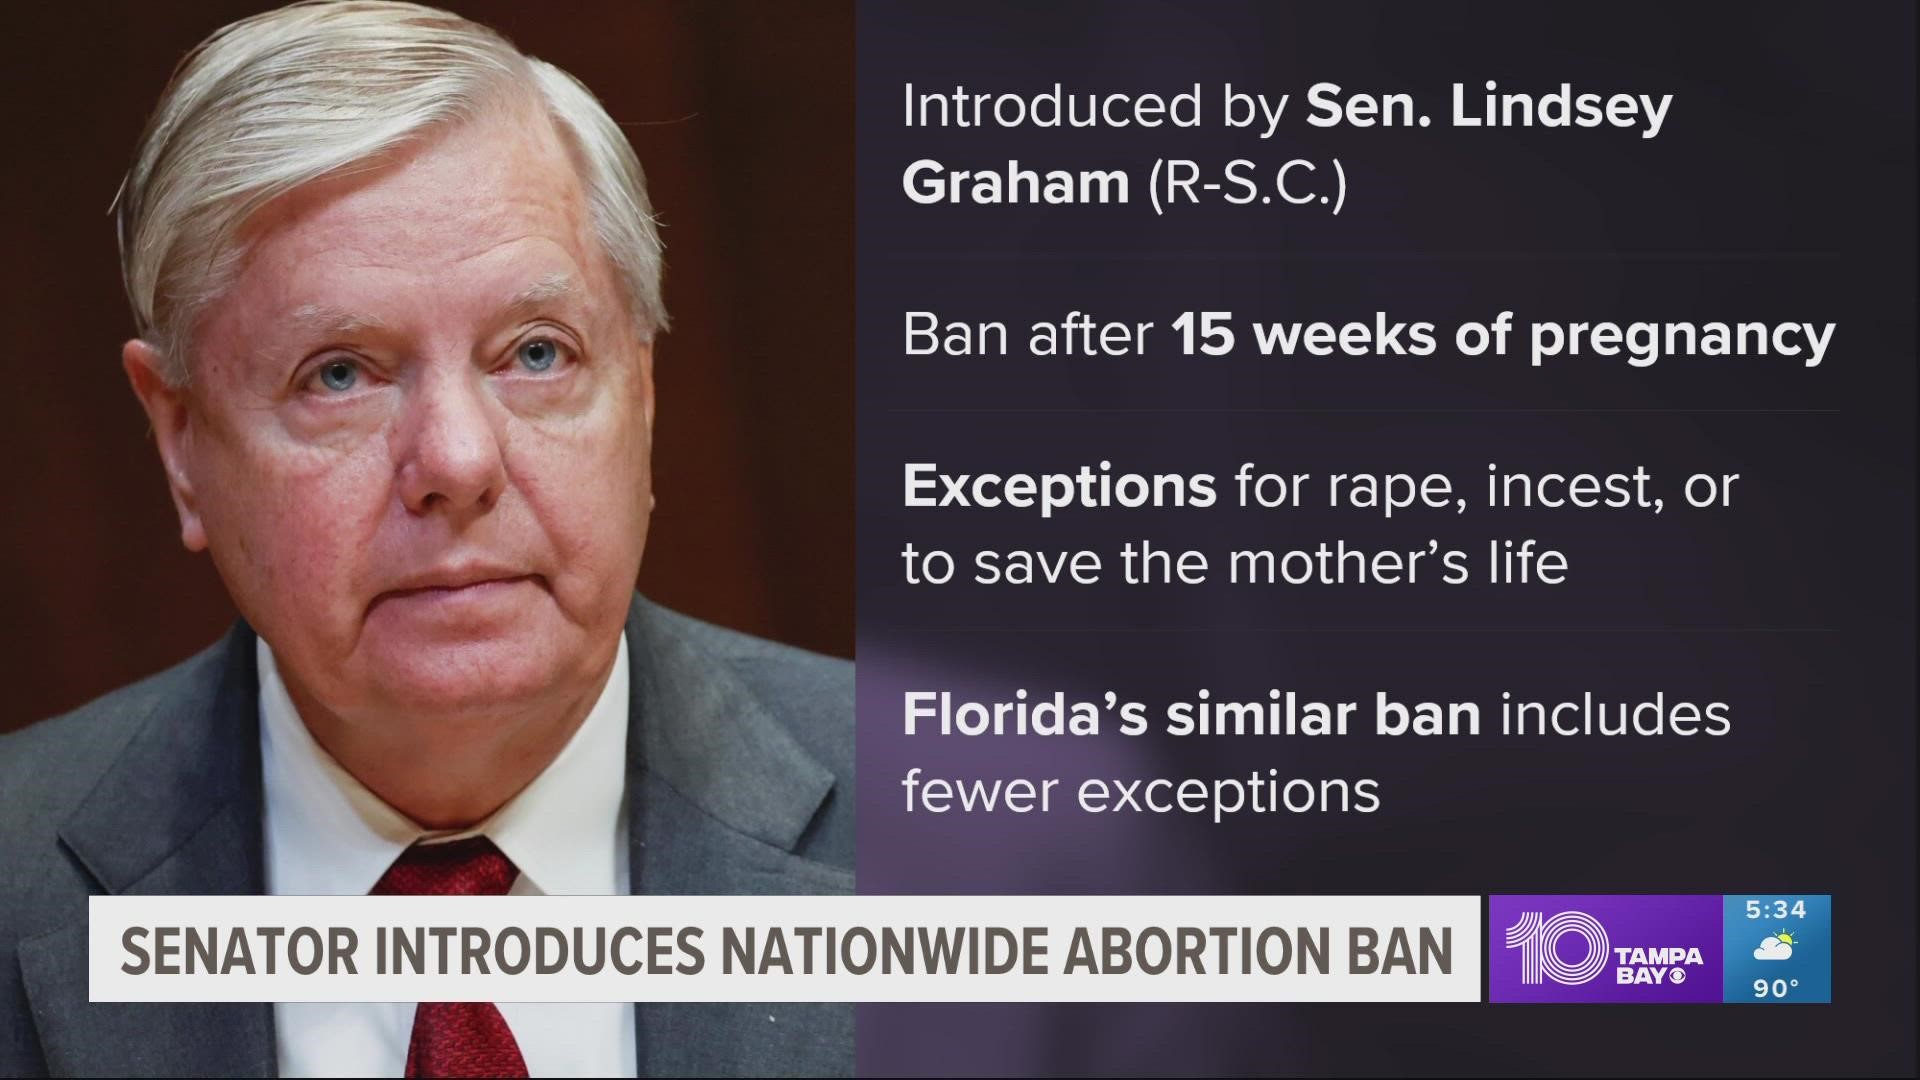 The White House criticized the South Carolina senator's proposed nationwide 15-week abortion ban, saying it is "wildly out of step with what Americans believe."